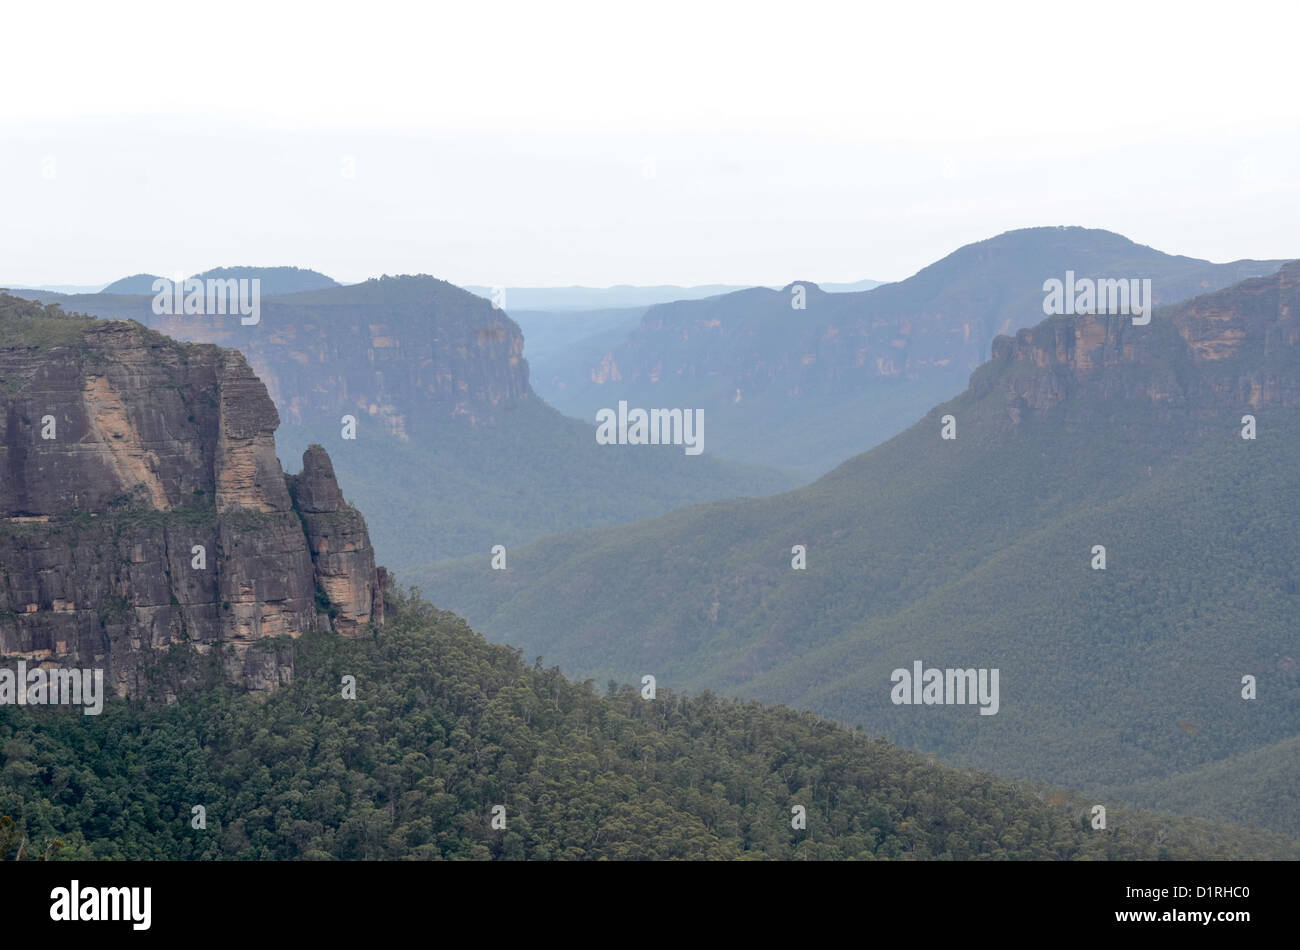 KATOOMBA, Australia - The view out over the Blue Mountains near Blackheath, New South Wales, Australia, from George Phillips Lookout. Phillips was secretary of the Blackheath Group of the Blue Mountains Sights Reserves Trust from 1917 to 1939. Stock Photo